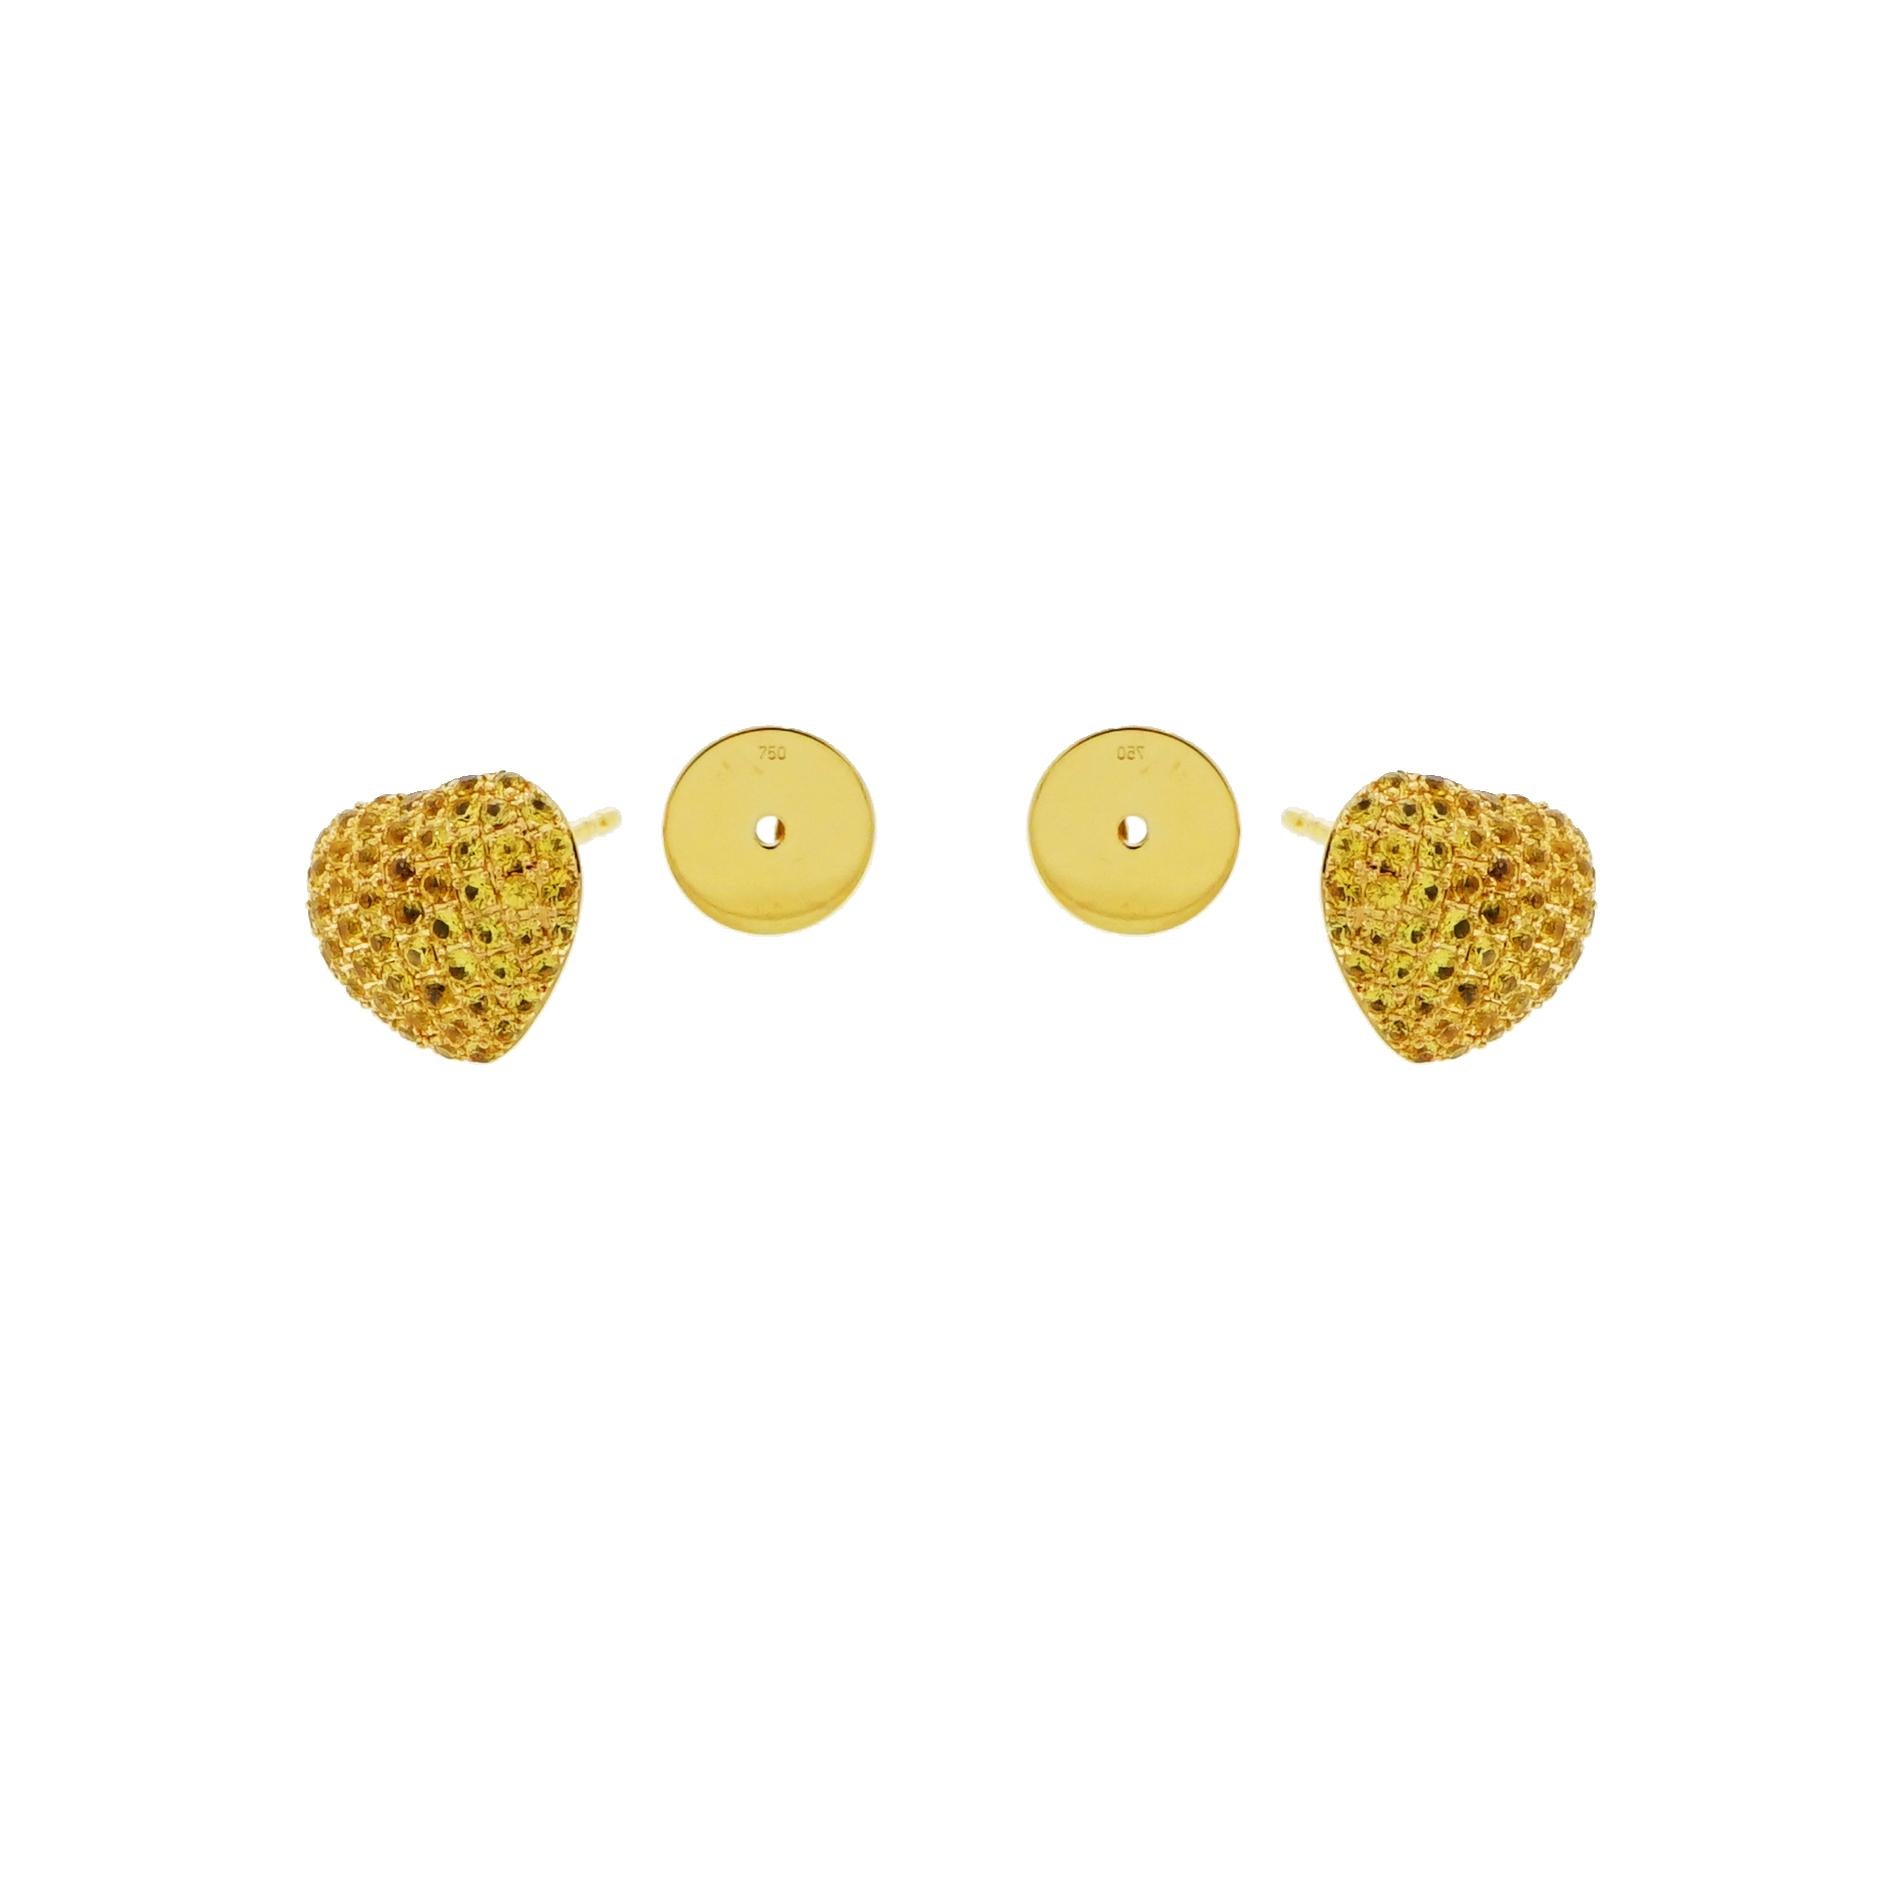 Theo Fennell's work is unrivaled in its quality, craftsmanship and uniqueness. 
He delights, inspires and enchants for generations with this small and informal pair of Yellow Sapphire Earrings... not too big and or dressy.  And yet, a classic heart